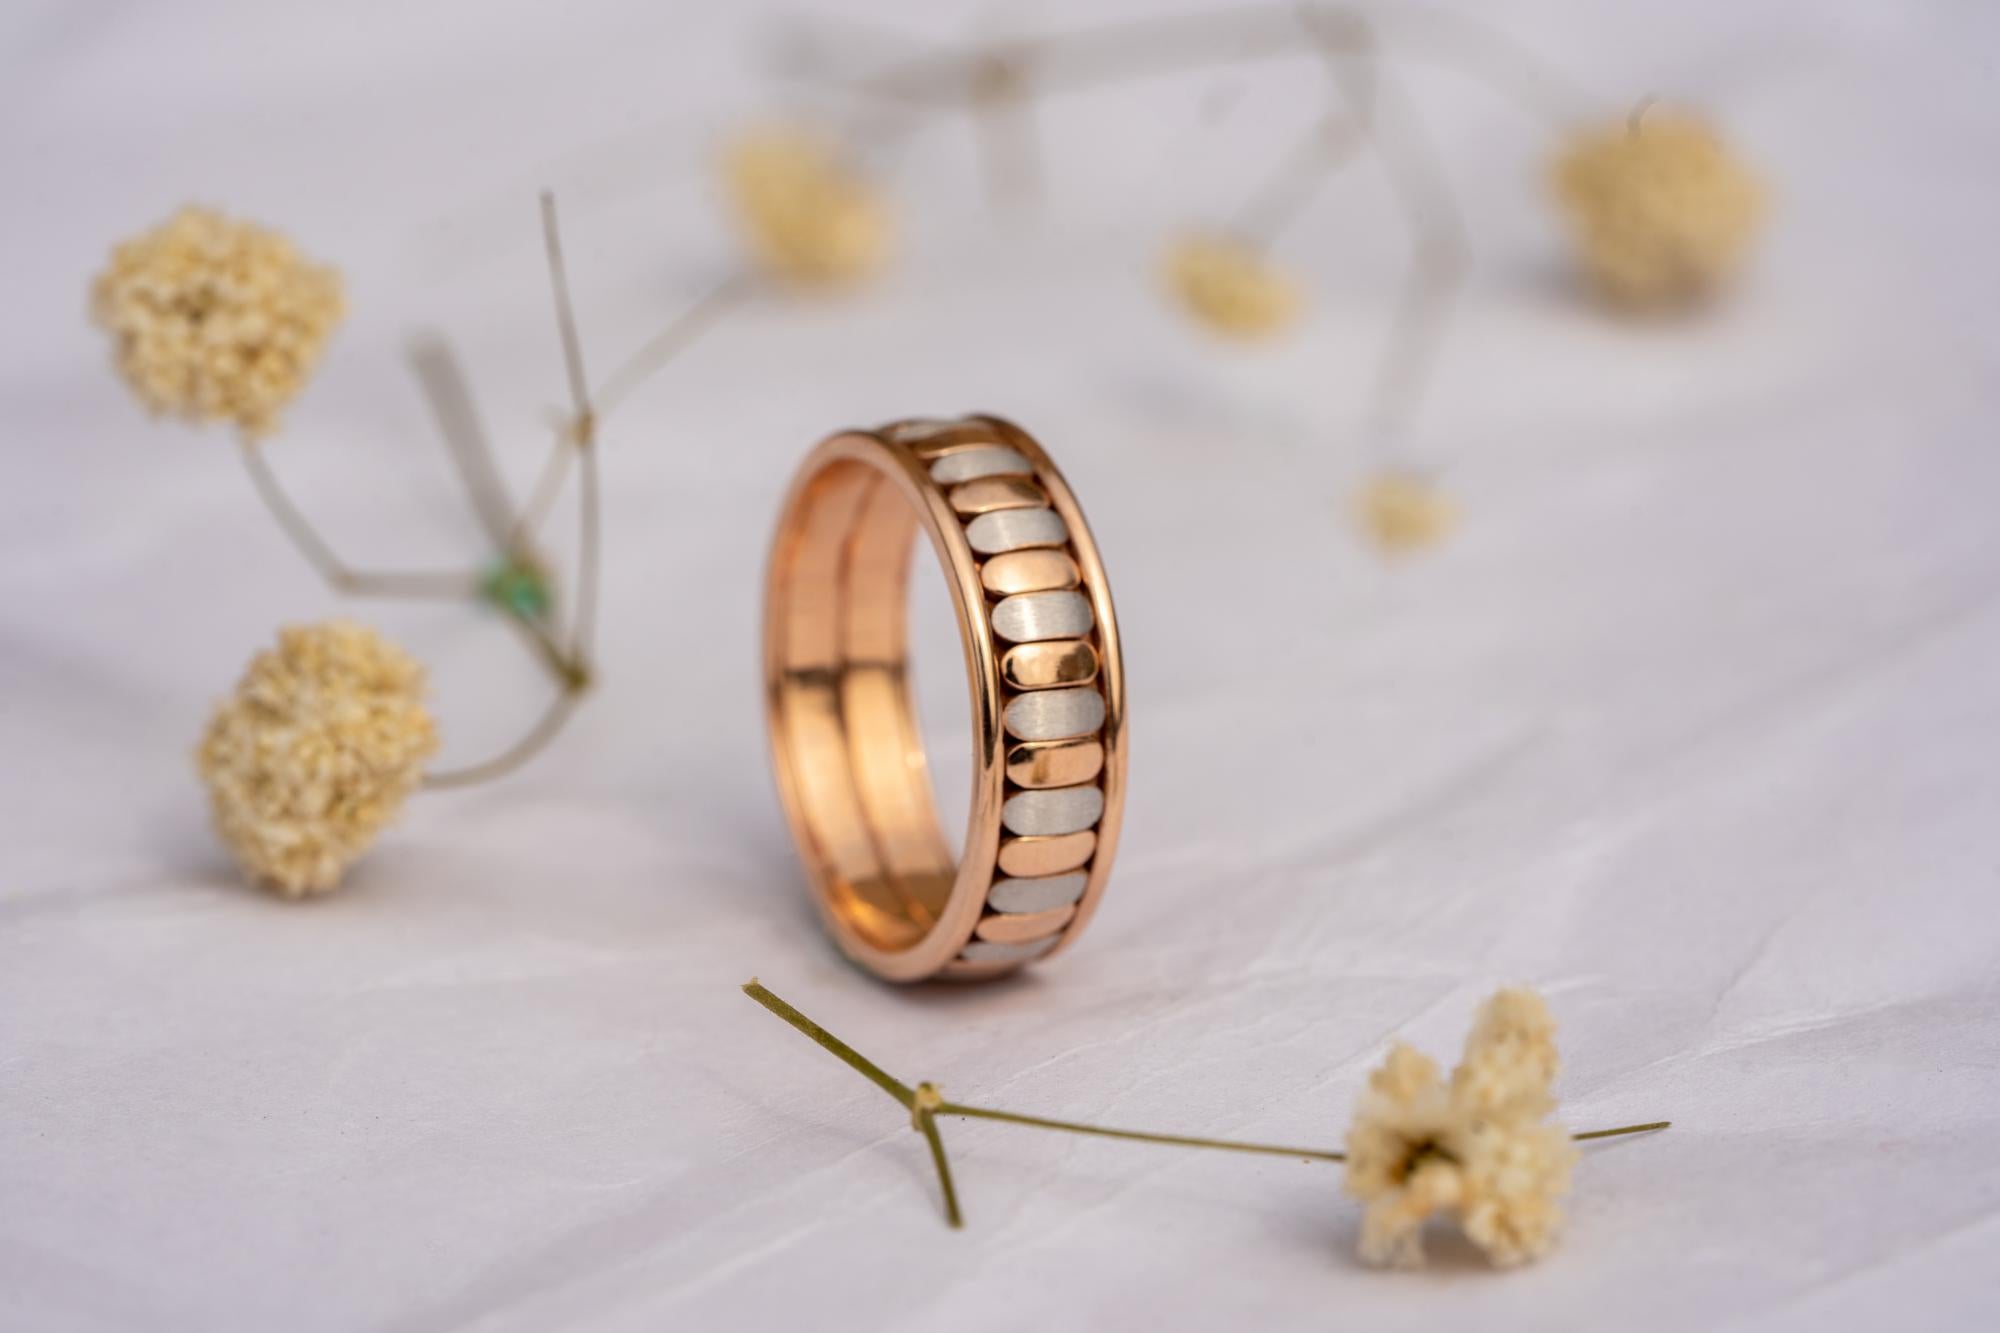 Rose gold Wedding Bands,6 mm Traditional Wedding Band